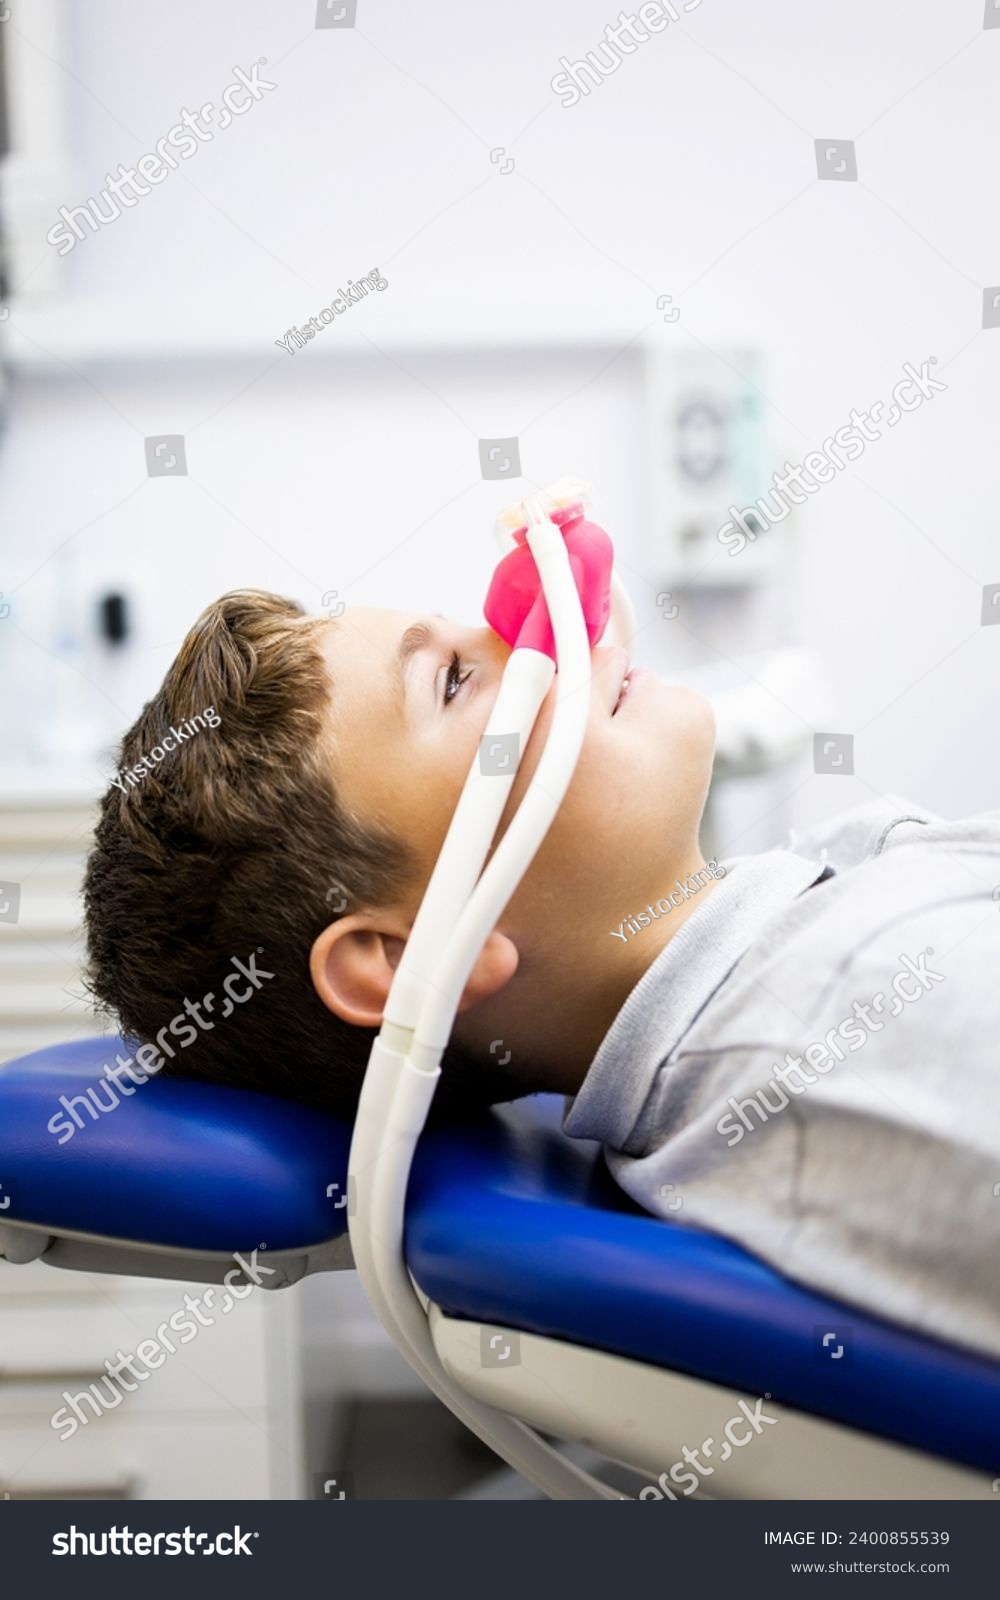 Fear of the dentist! Vertical photo of a little boy sits in a dentist's office wearing a nasal mask breathing nitrous oxide to relax. Concept of feeling relaxed with laughing gas. #2400855539